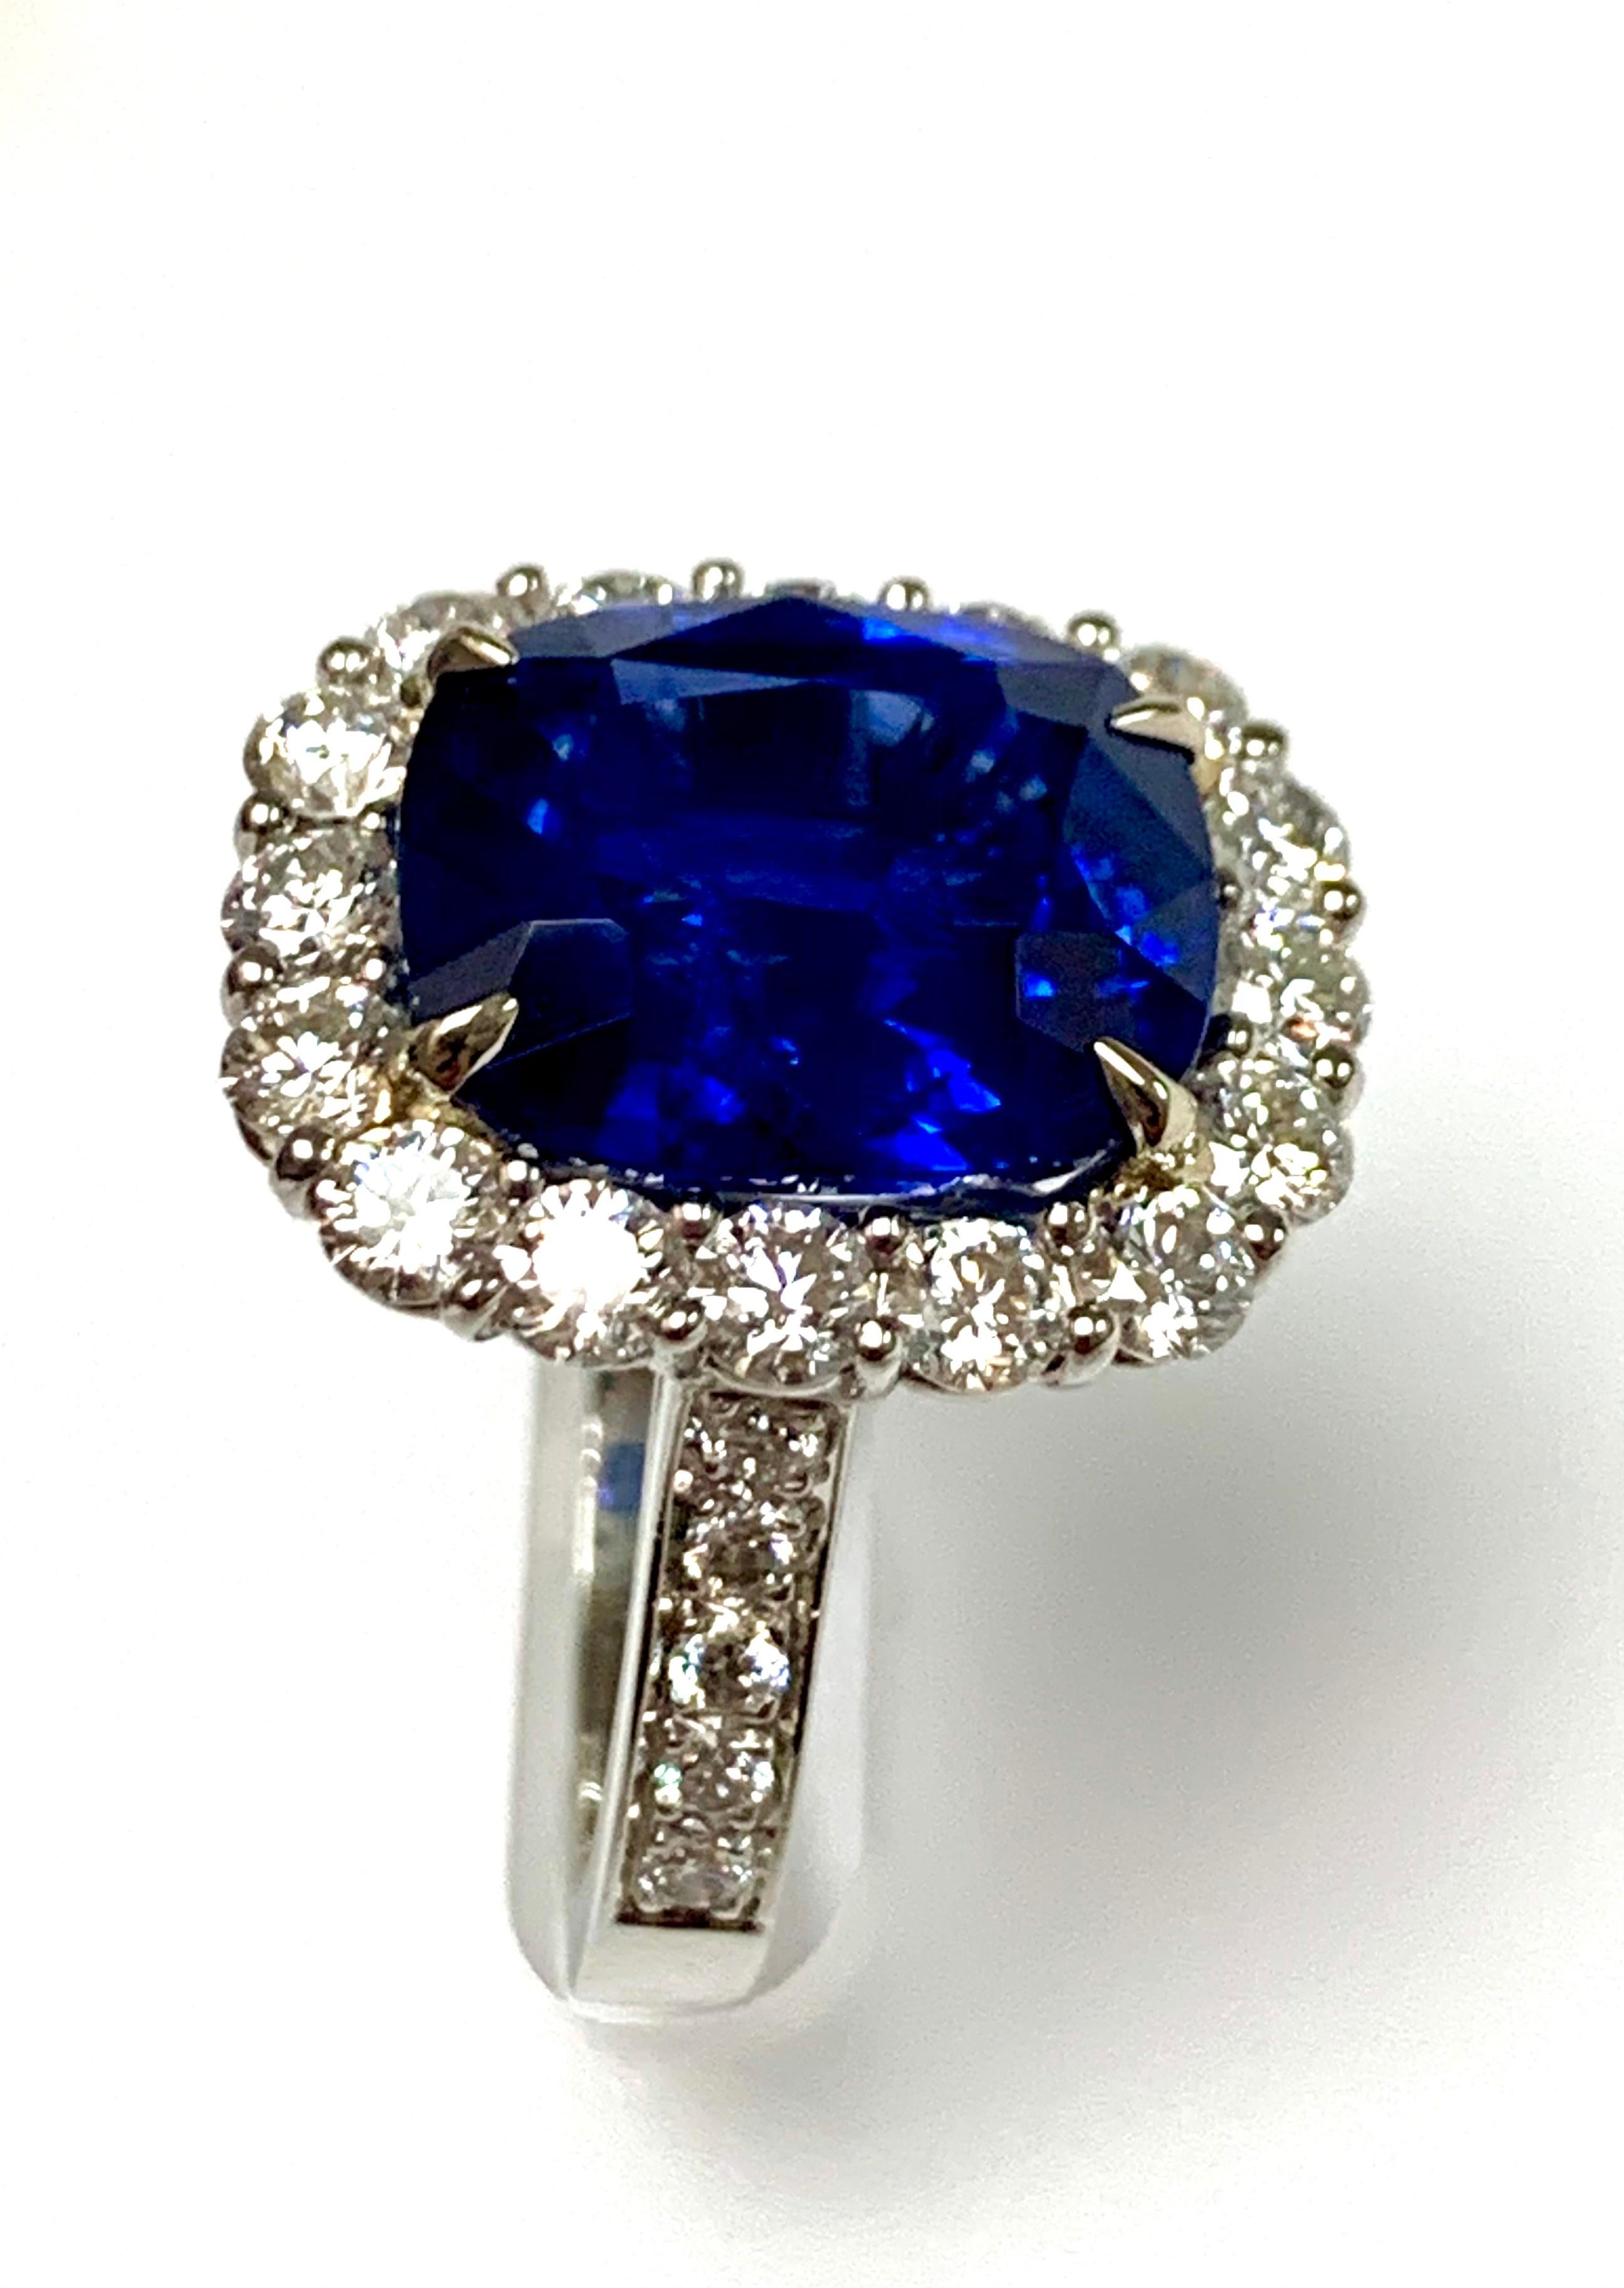 Modern CDC Certified 7.59 Carat Cushion Shape Blue Sapphire Diamond Cocktail Ring For Sale